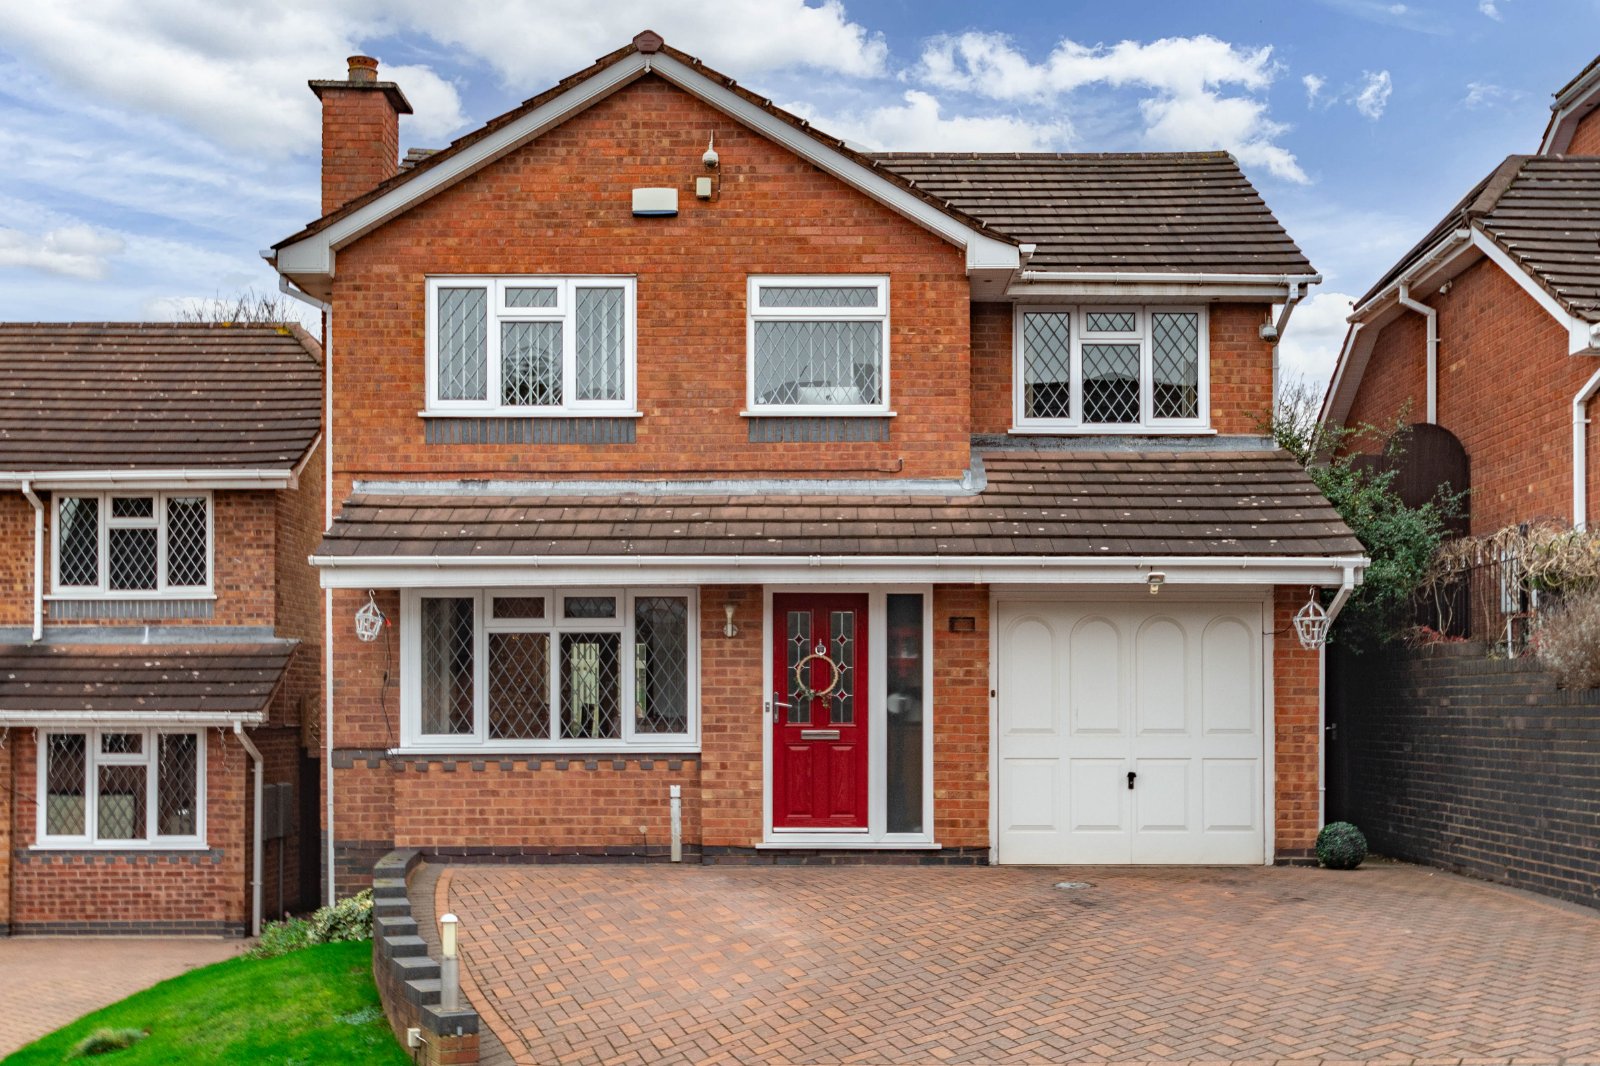 4 bed house for sale in Ormonde Close, Halesowen  - Property Image 1